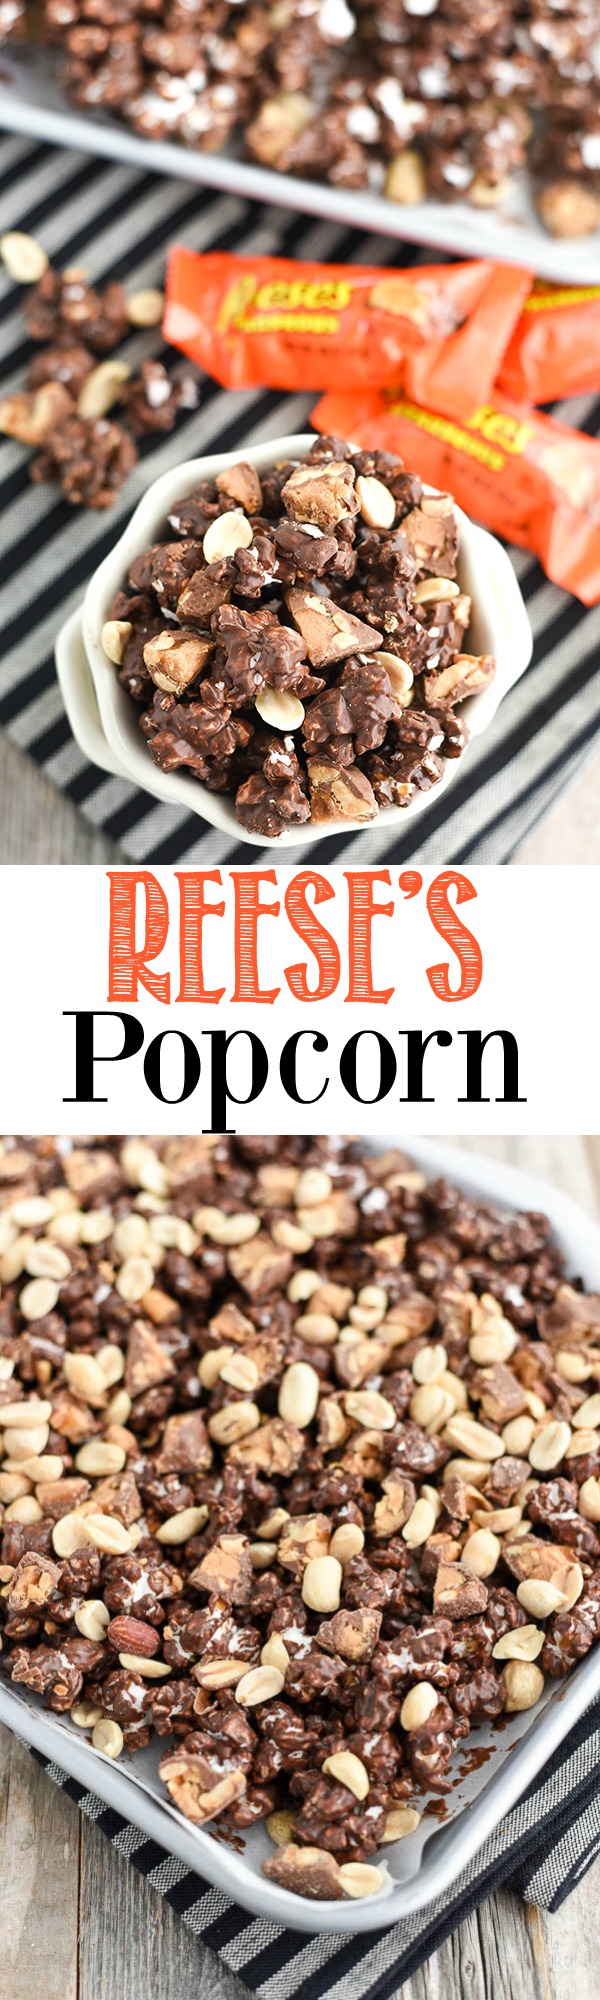 Reese's Chocolate Popcorn - chocolate covered popcorn made with Reese's Nutrageous bars and peanuts.